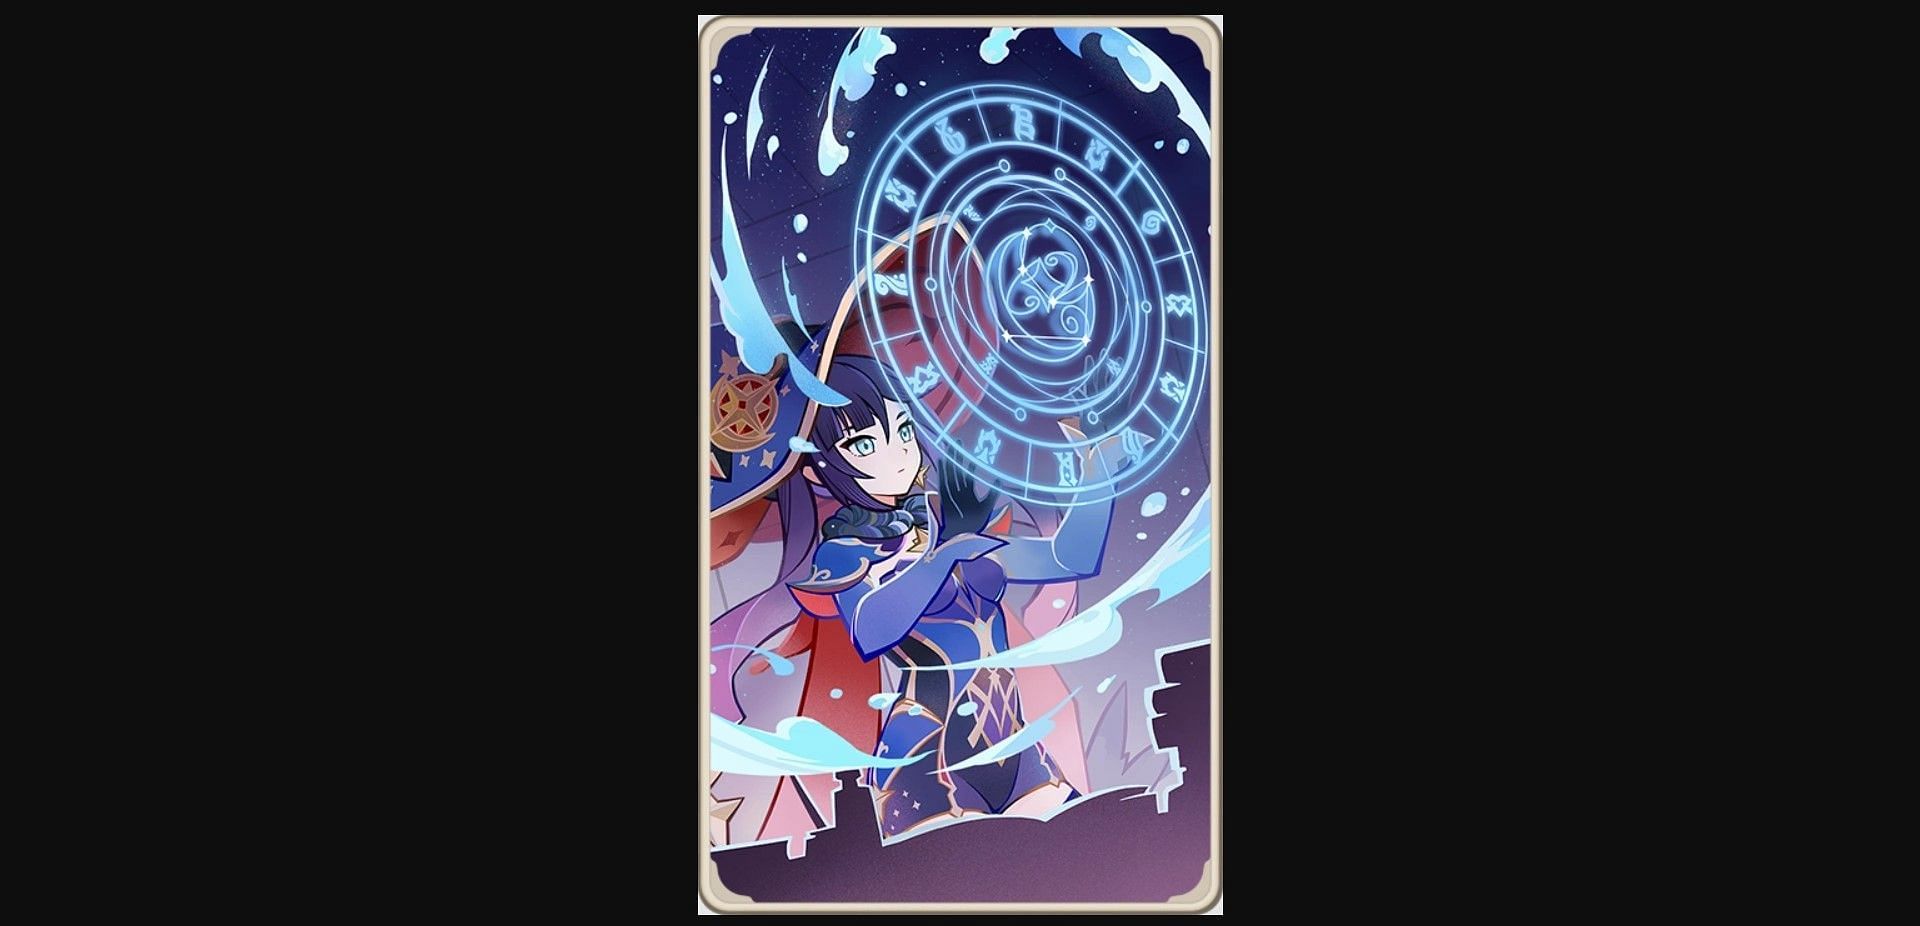 The Starsigns Card can be used to increase burst uptime for quick attacks (Image via HoyoLab)